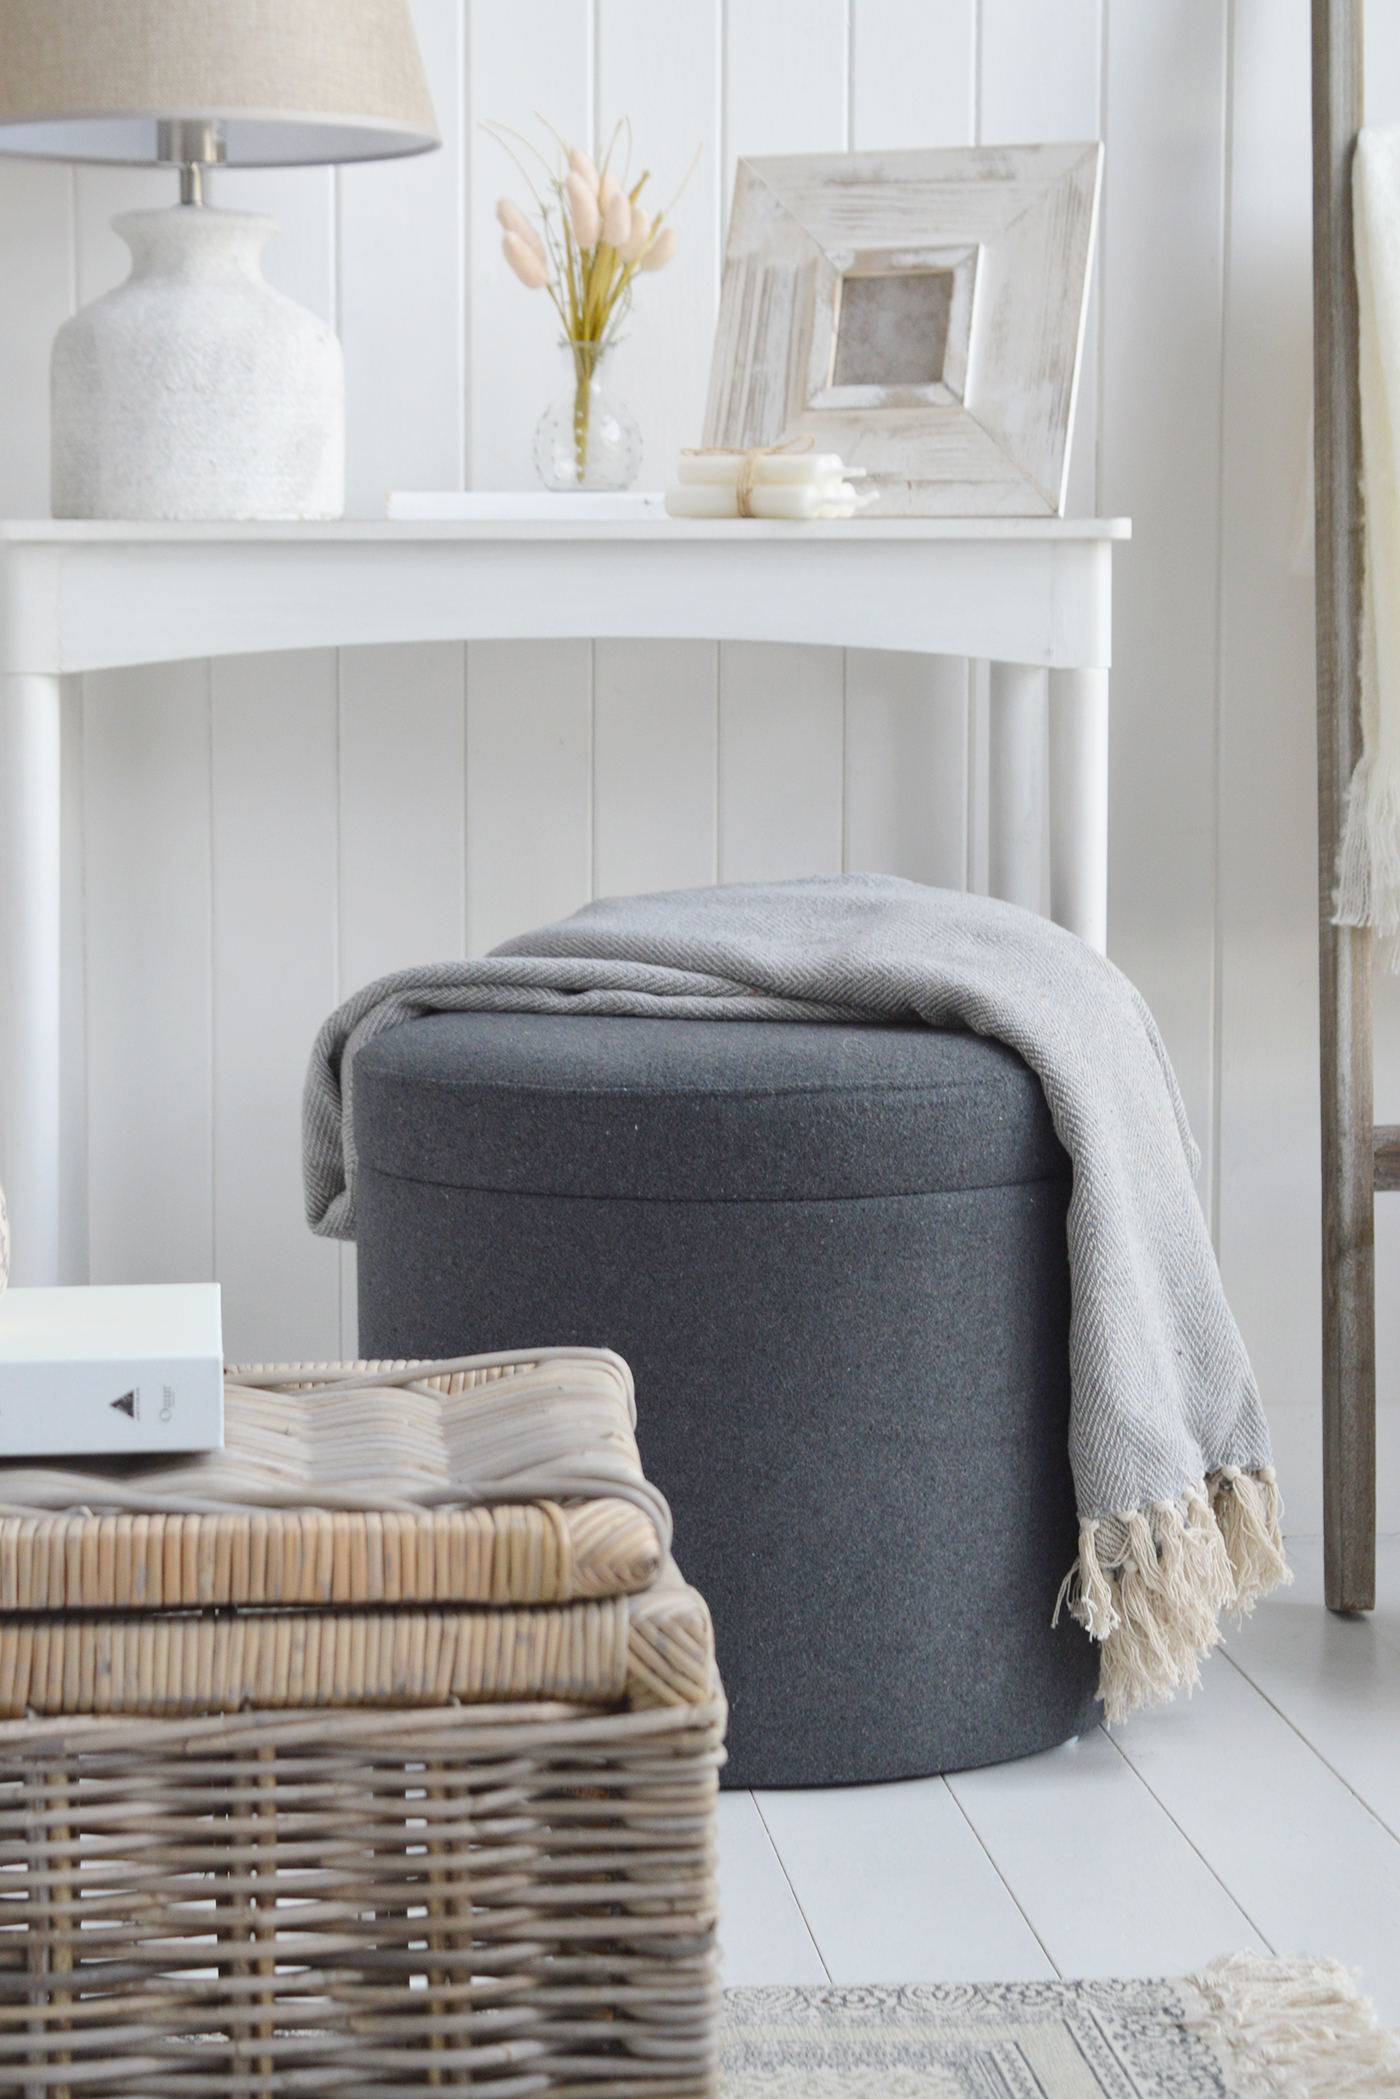 Westhampton grey storage soft storage footstool coffee table for living room furniture from The White Lighthouse. Bathroom, Living Room, Bedroom and Hallway Furniture for beautiful homes. Coastal, New England and country interiors